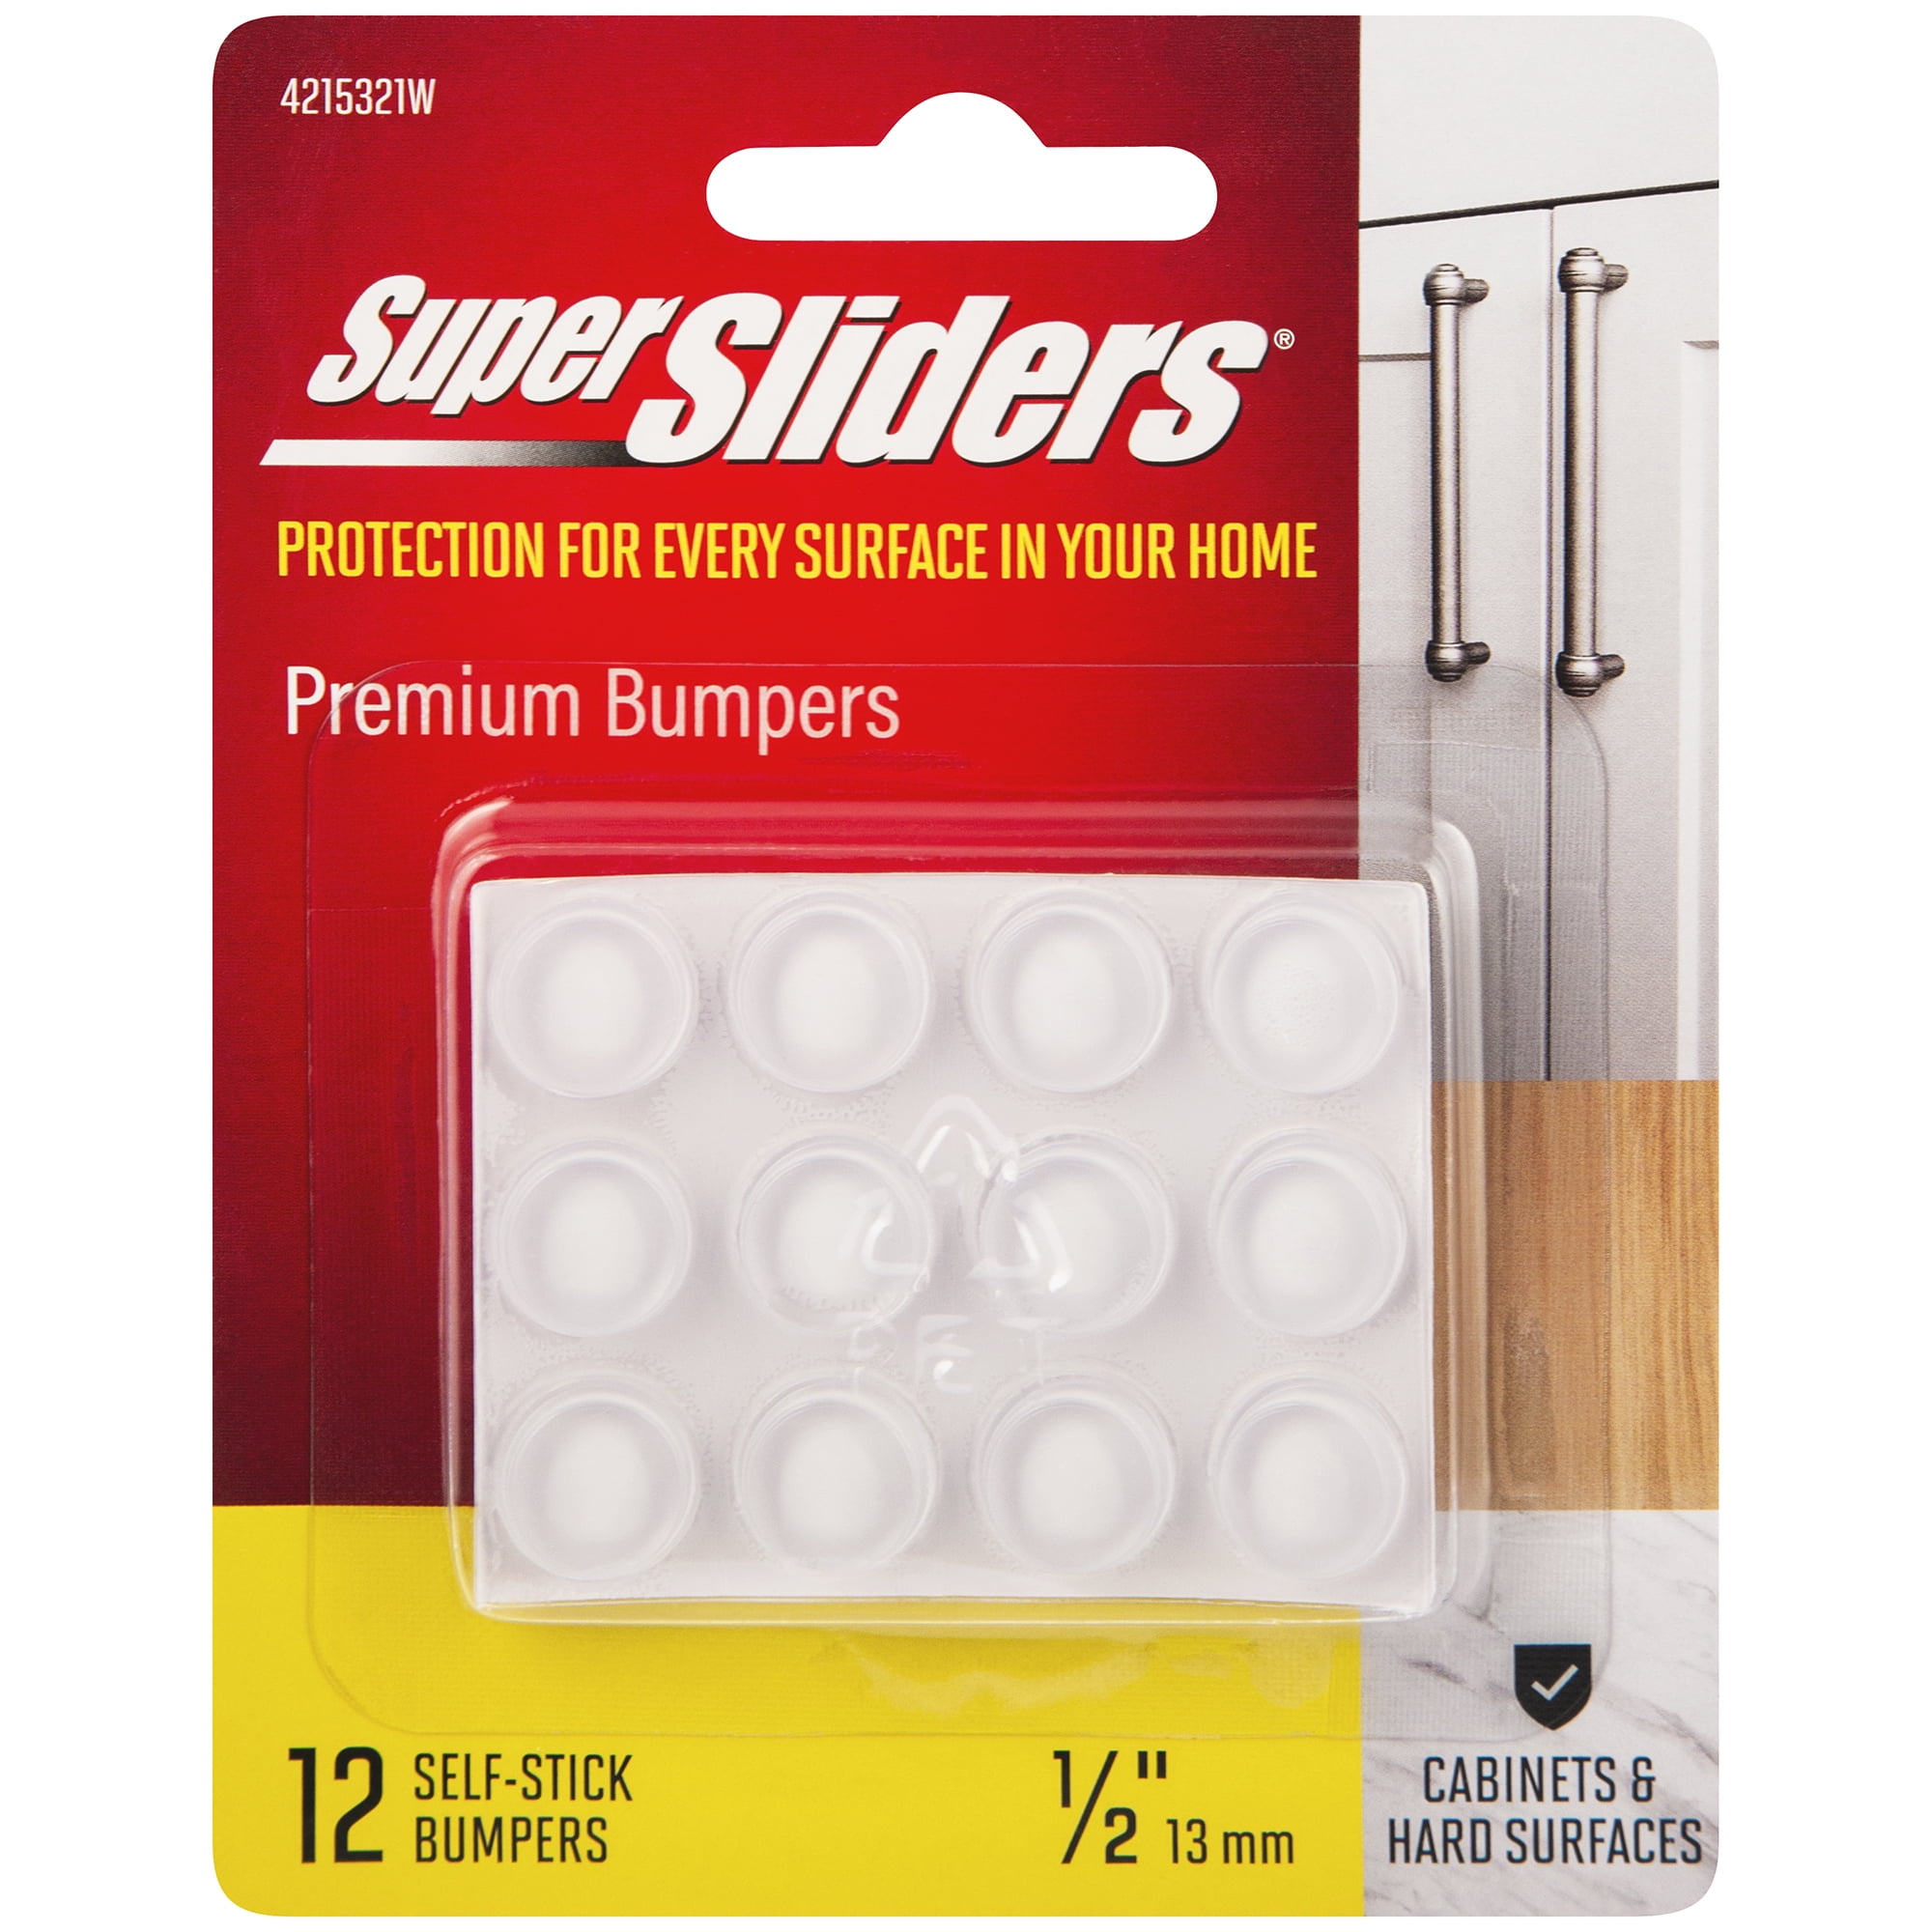 You Get 2 Packs Of 20 Self-Stick Clear Plastic Bumpers 1/2" Round 20 Piece 